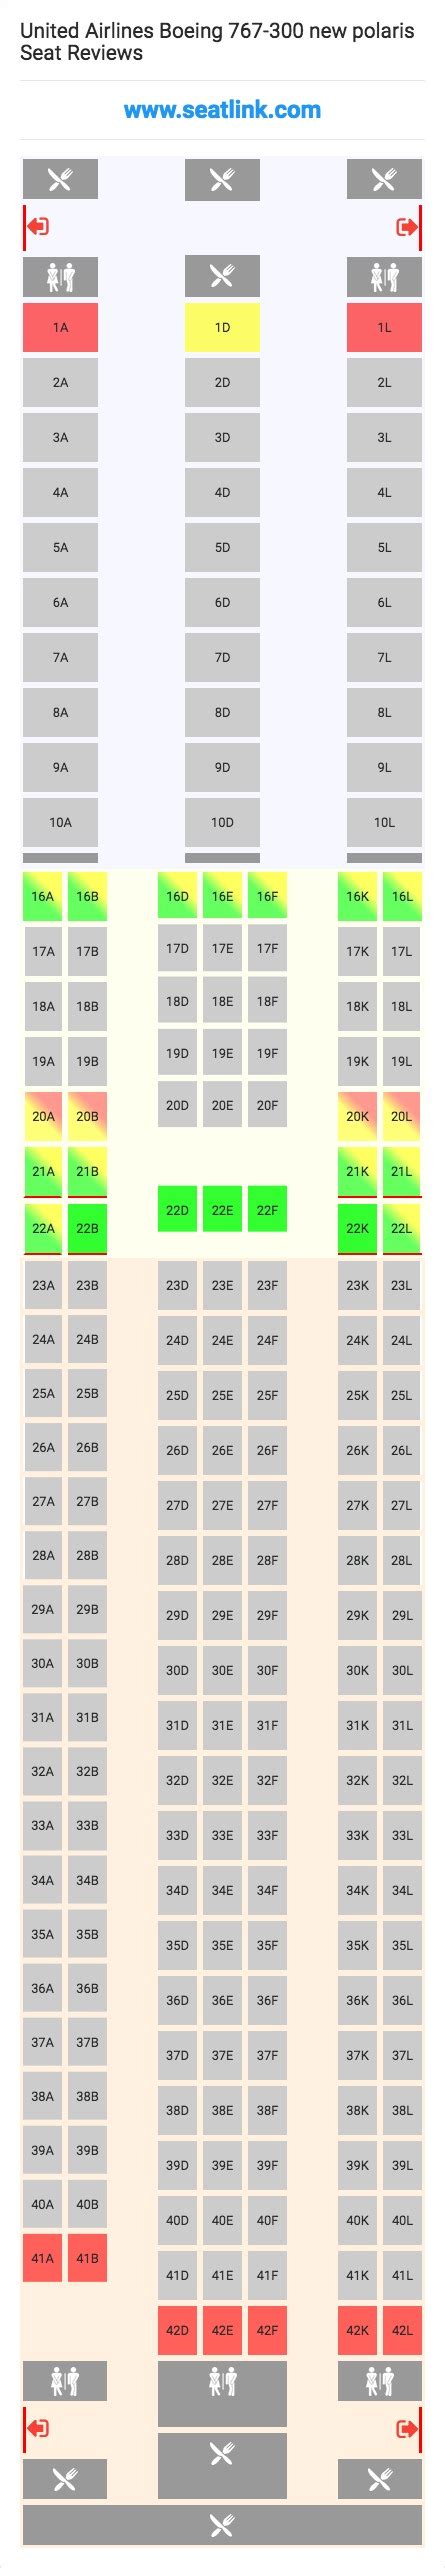 United Airlines Boeing 767 300 New Polaris Seating Chart Updated May